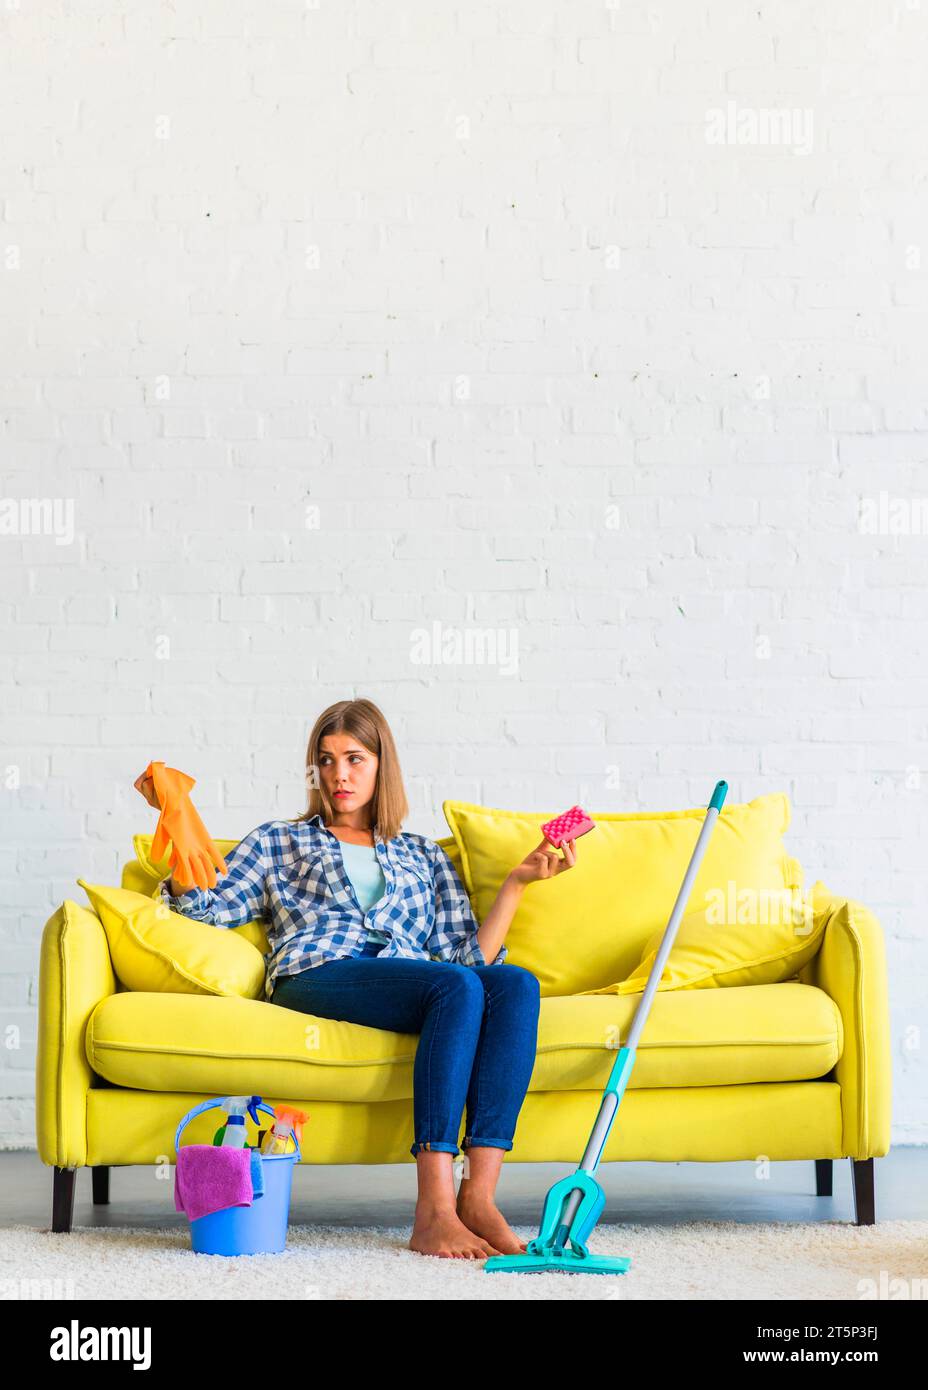 Confused young woman sitting yellow sofa holding gloves brush Stock Photo